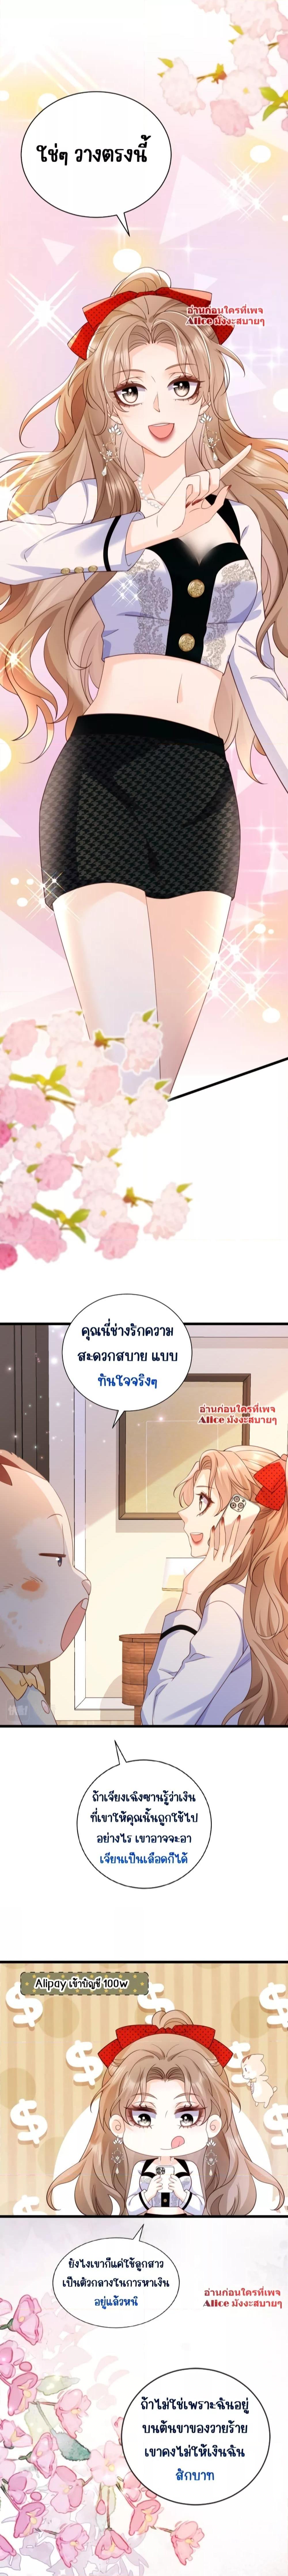 Goxuewen Female Supporting Role She Quit โ€“ เธเธญเธเธฐเธ—เธตเธเธฑเธเธเธ—เธขเธฑเธขเธ•เธฑเธงเธฃเนเธฒเธขเนเธเธเธดเธขเธฒเธขเธเนเธณเน€เธเนเธฒ เธ•เธญเธเธ—เธตเน 6 (10)